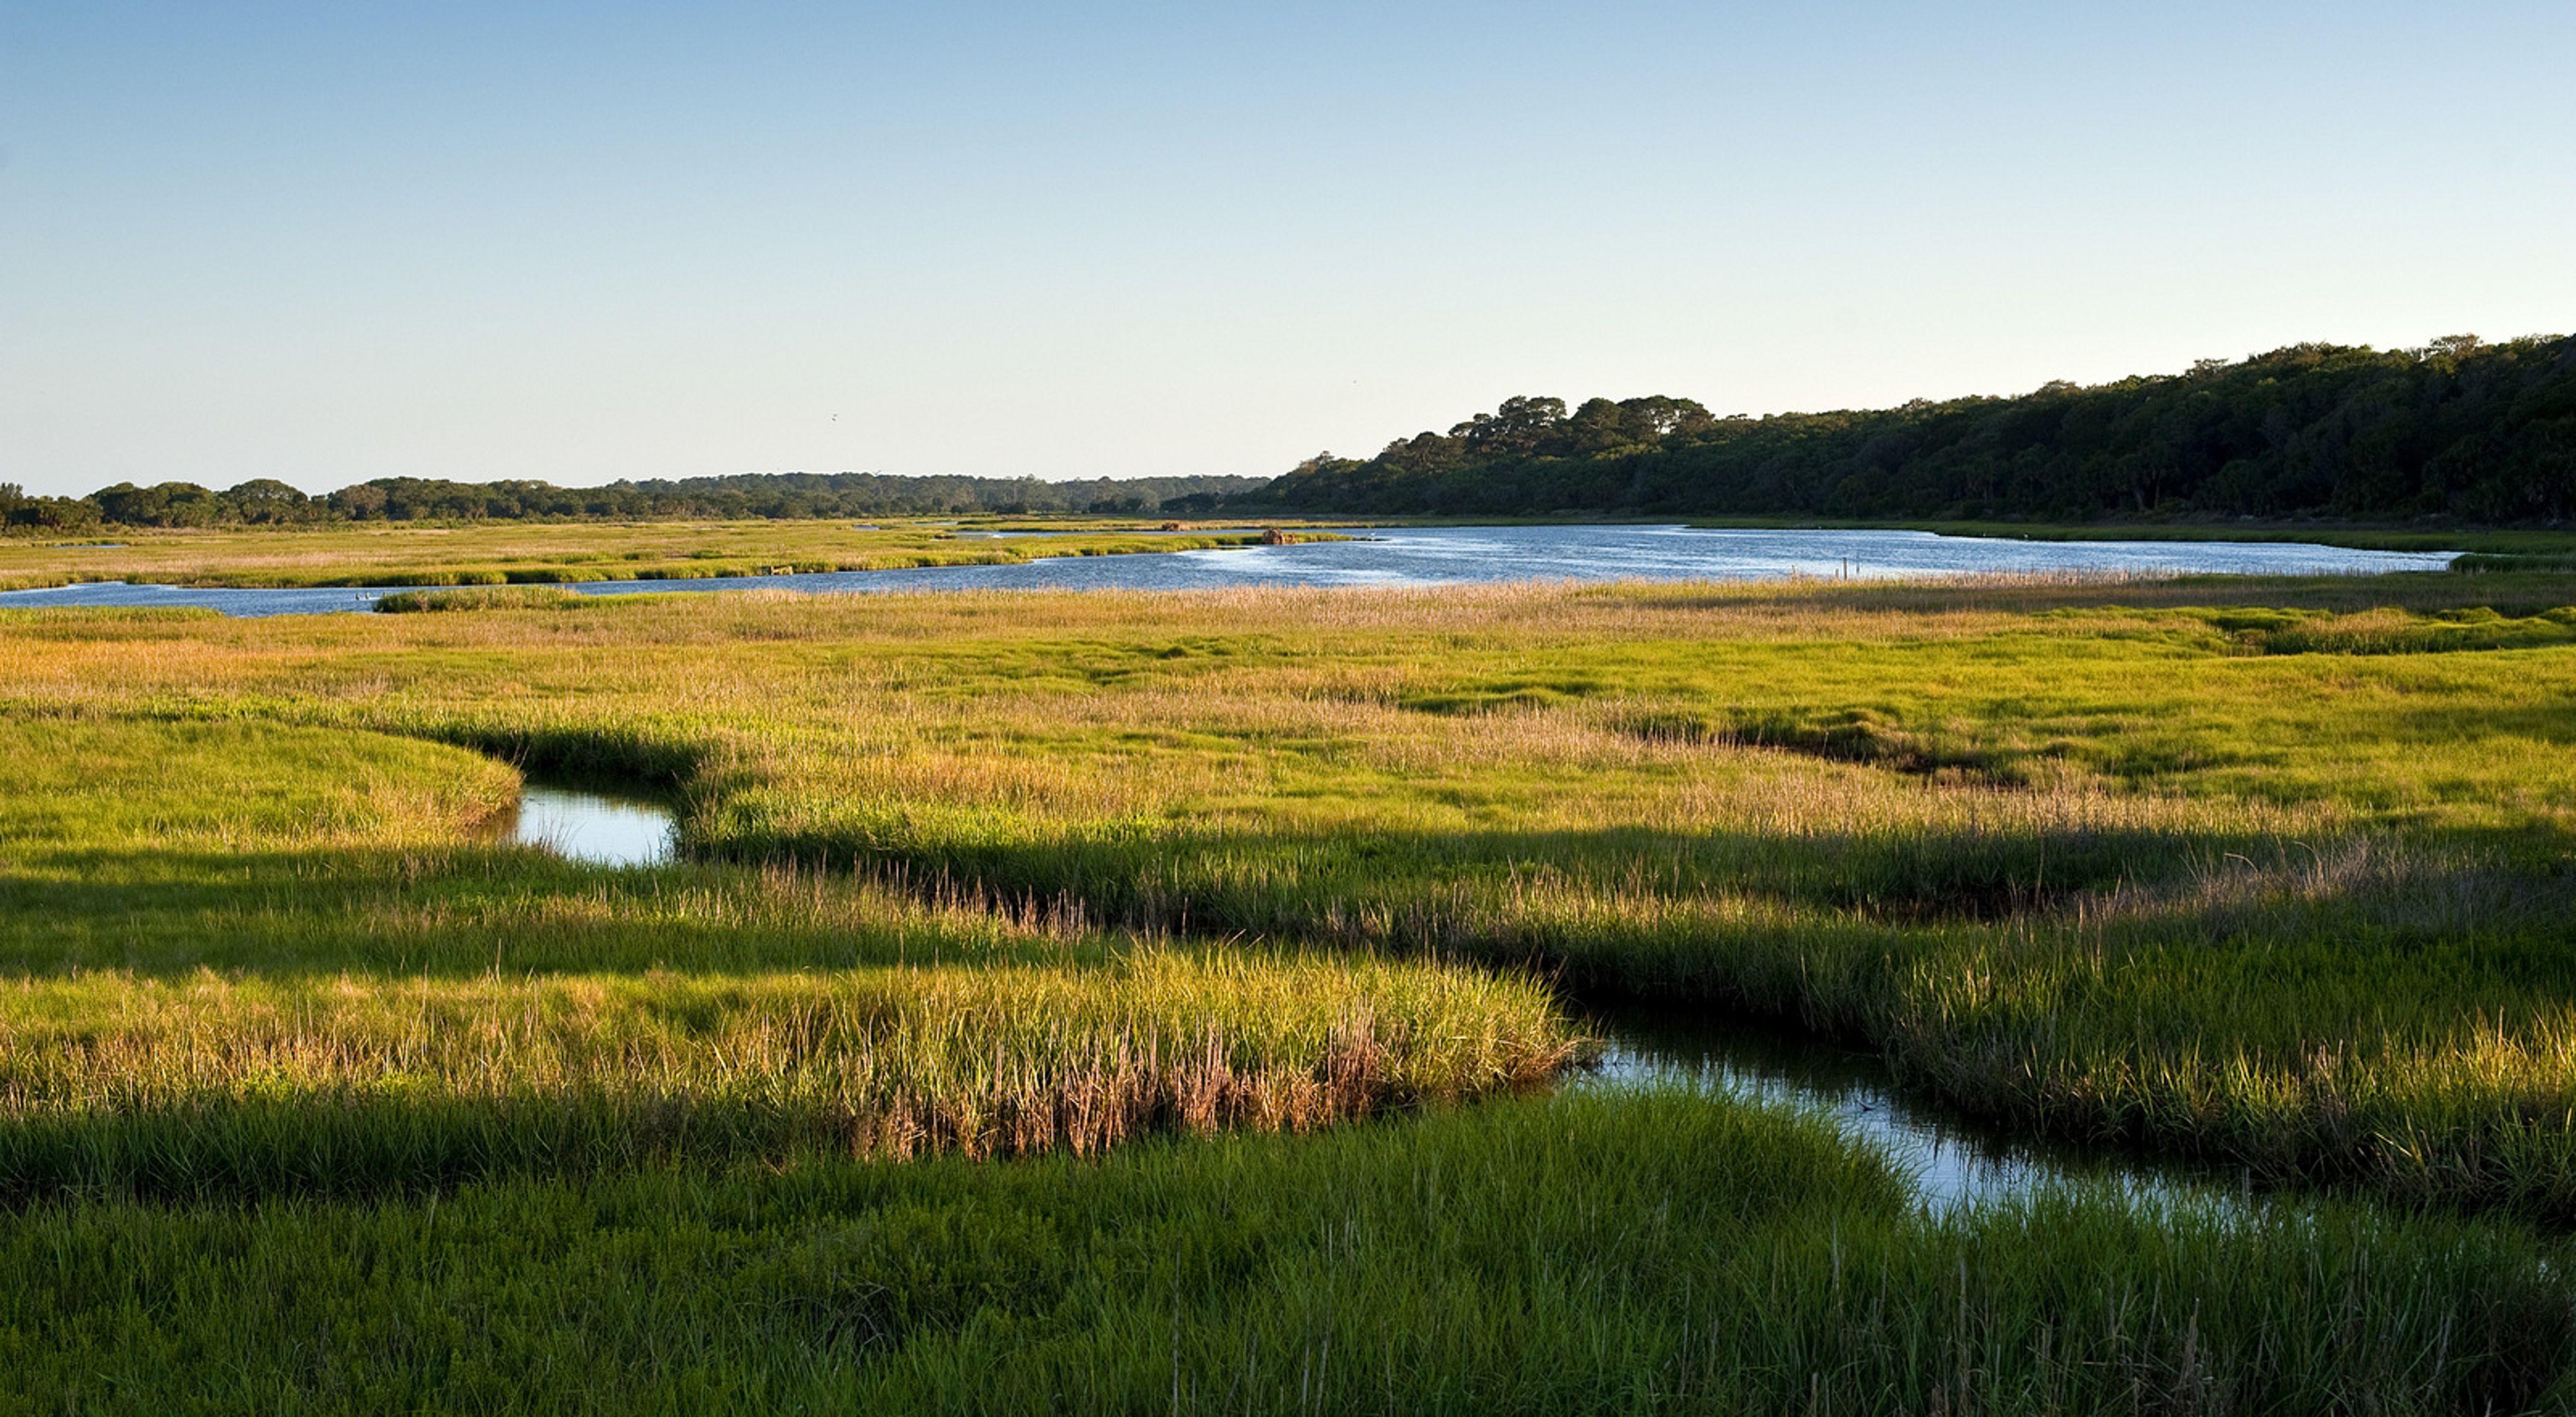 A marshland teeming with green grasses stretches into the distance on Little St. Simons Island.